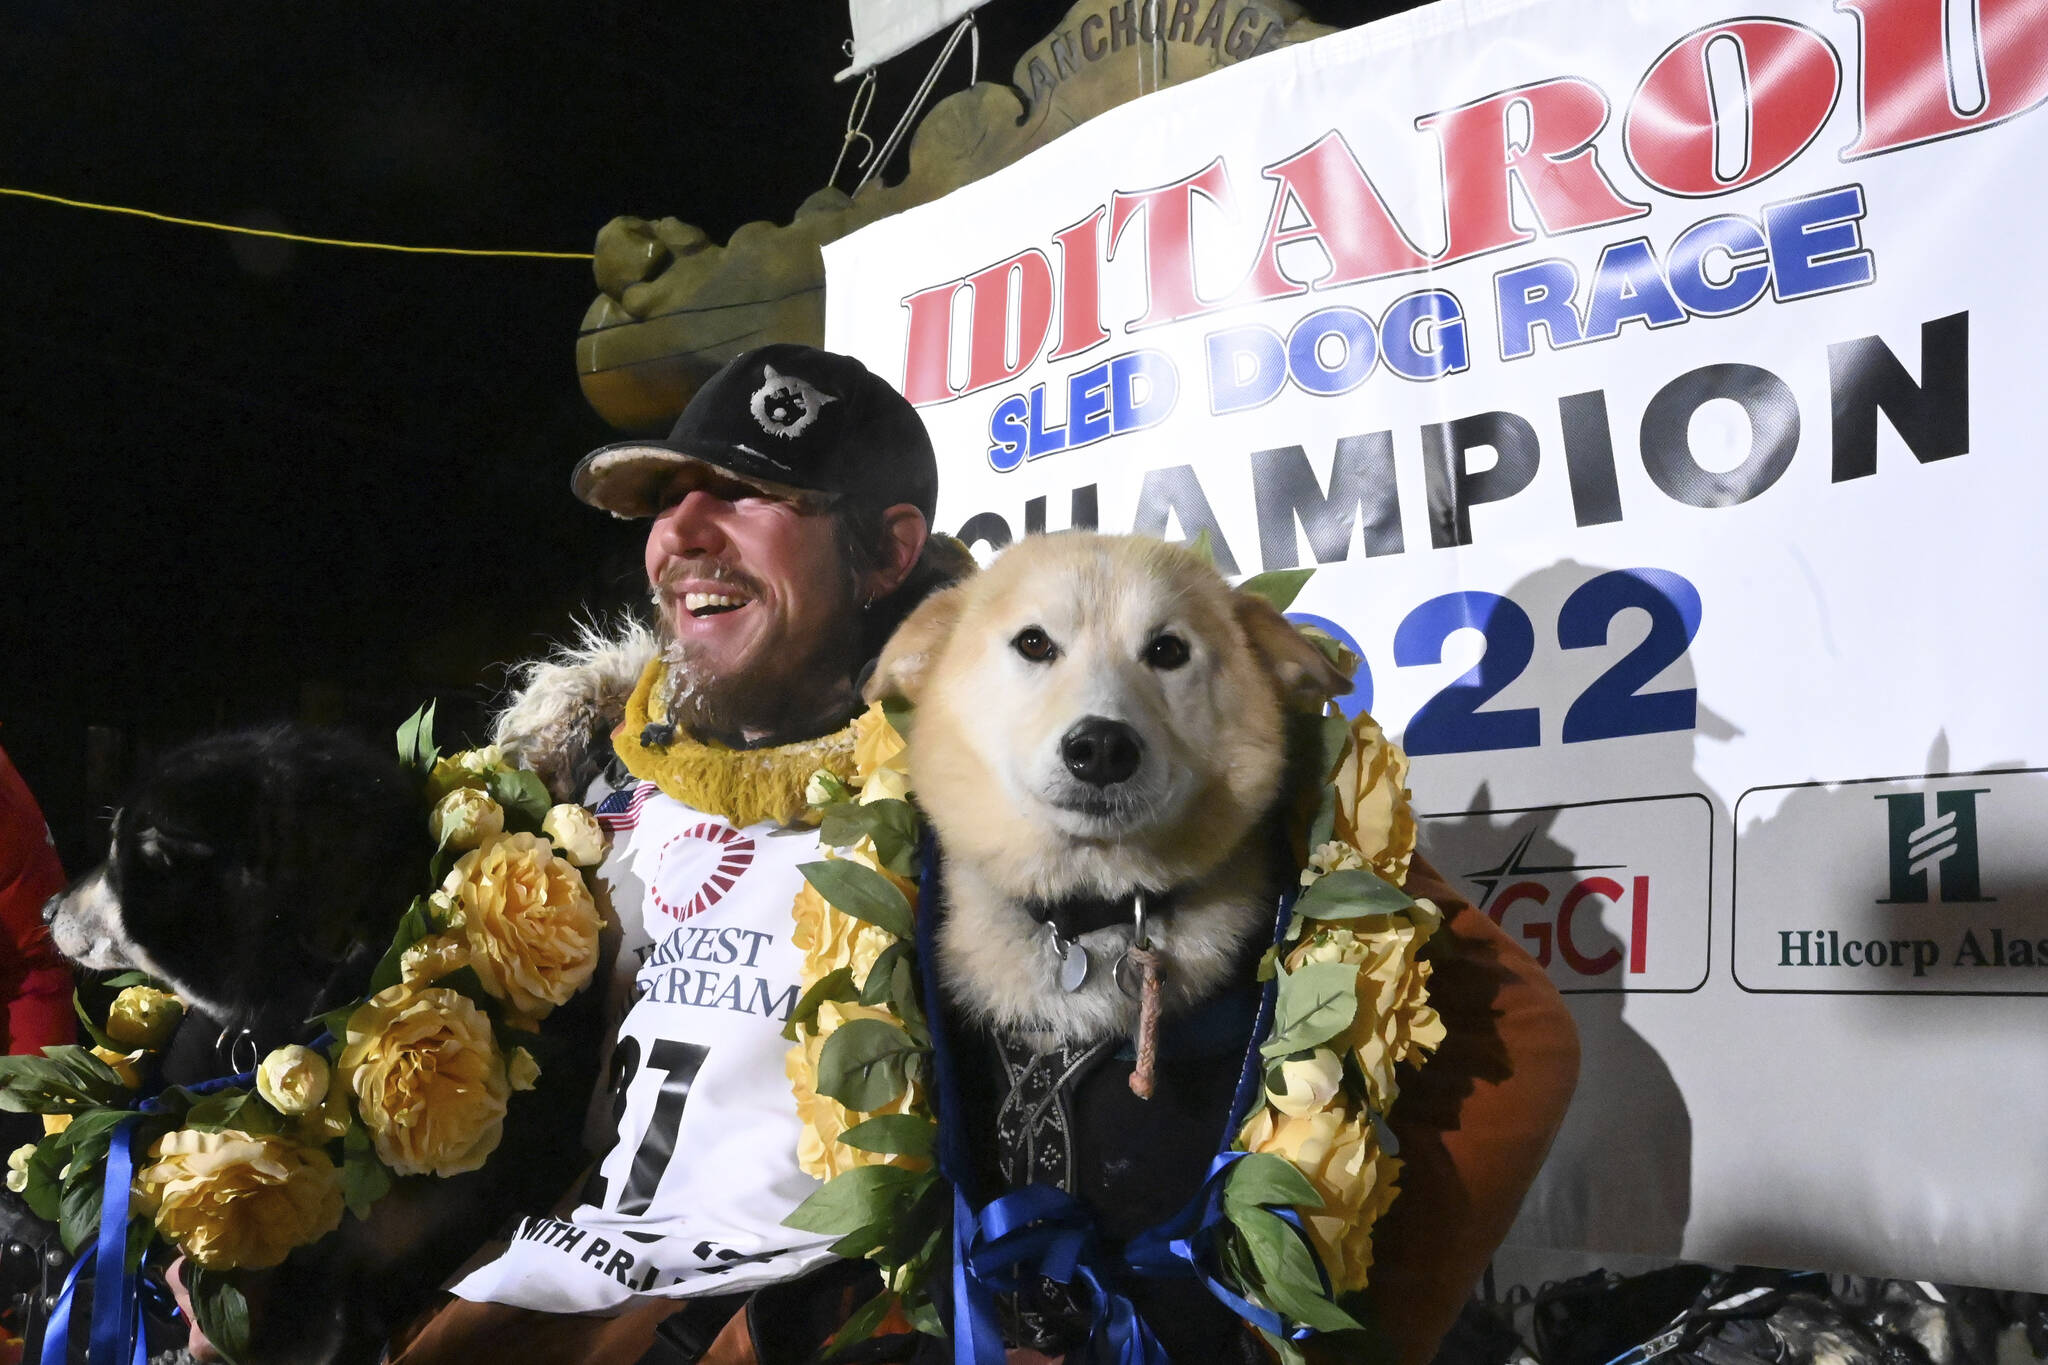 Iditarod winner Brent Sass poses for photos with lead dogs Morello, left, and Slater in the finish chute of the Iditarod Trail Sled Dog Race in Nome, Alaska, Tuesday March 15, 2022. (Anne Raup/Anchorage Daily News via AP)